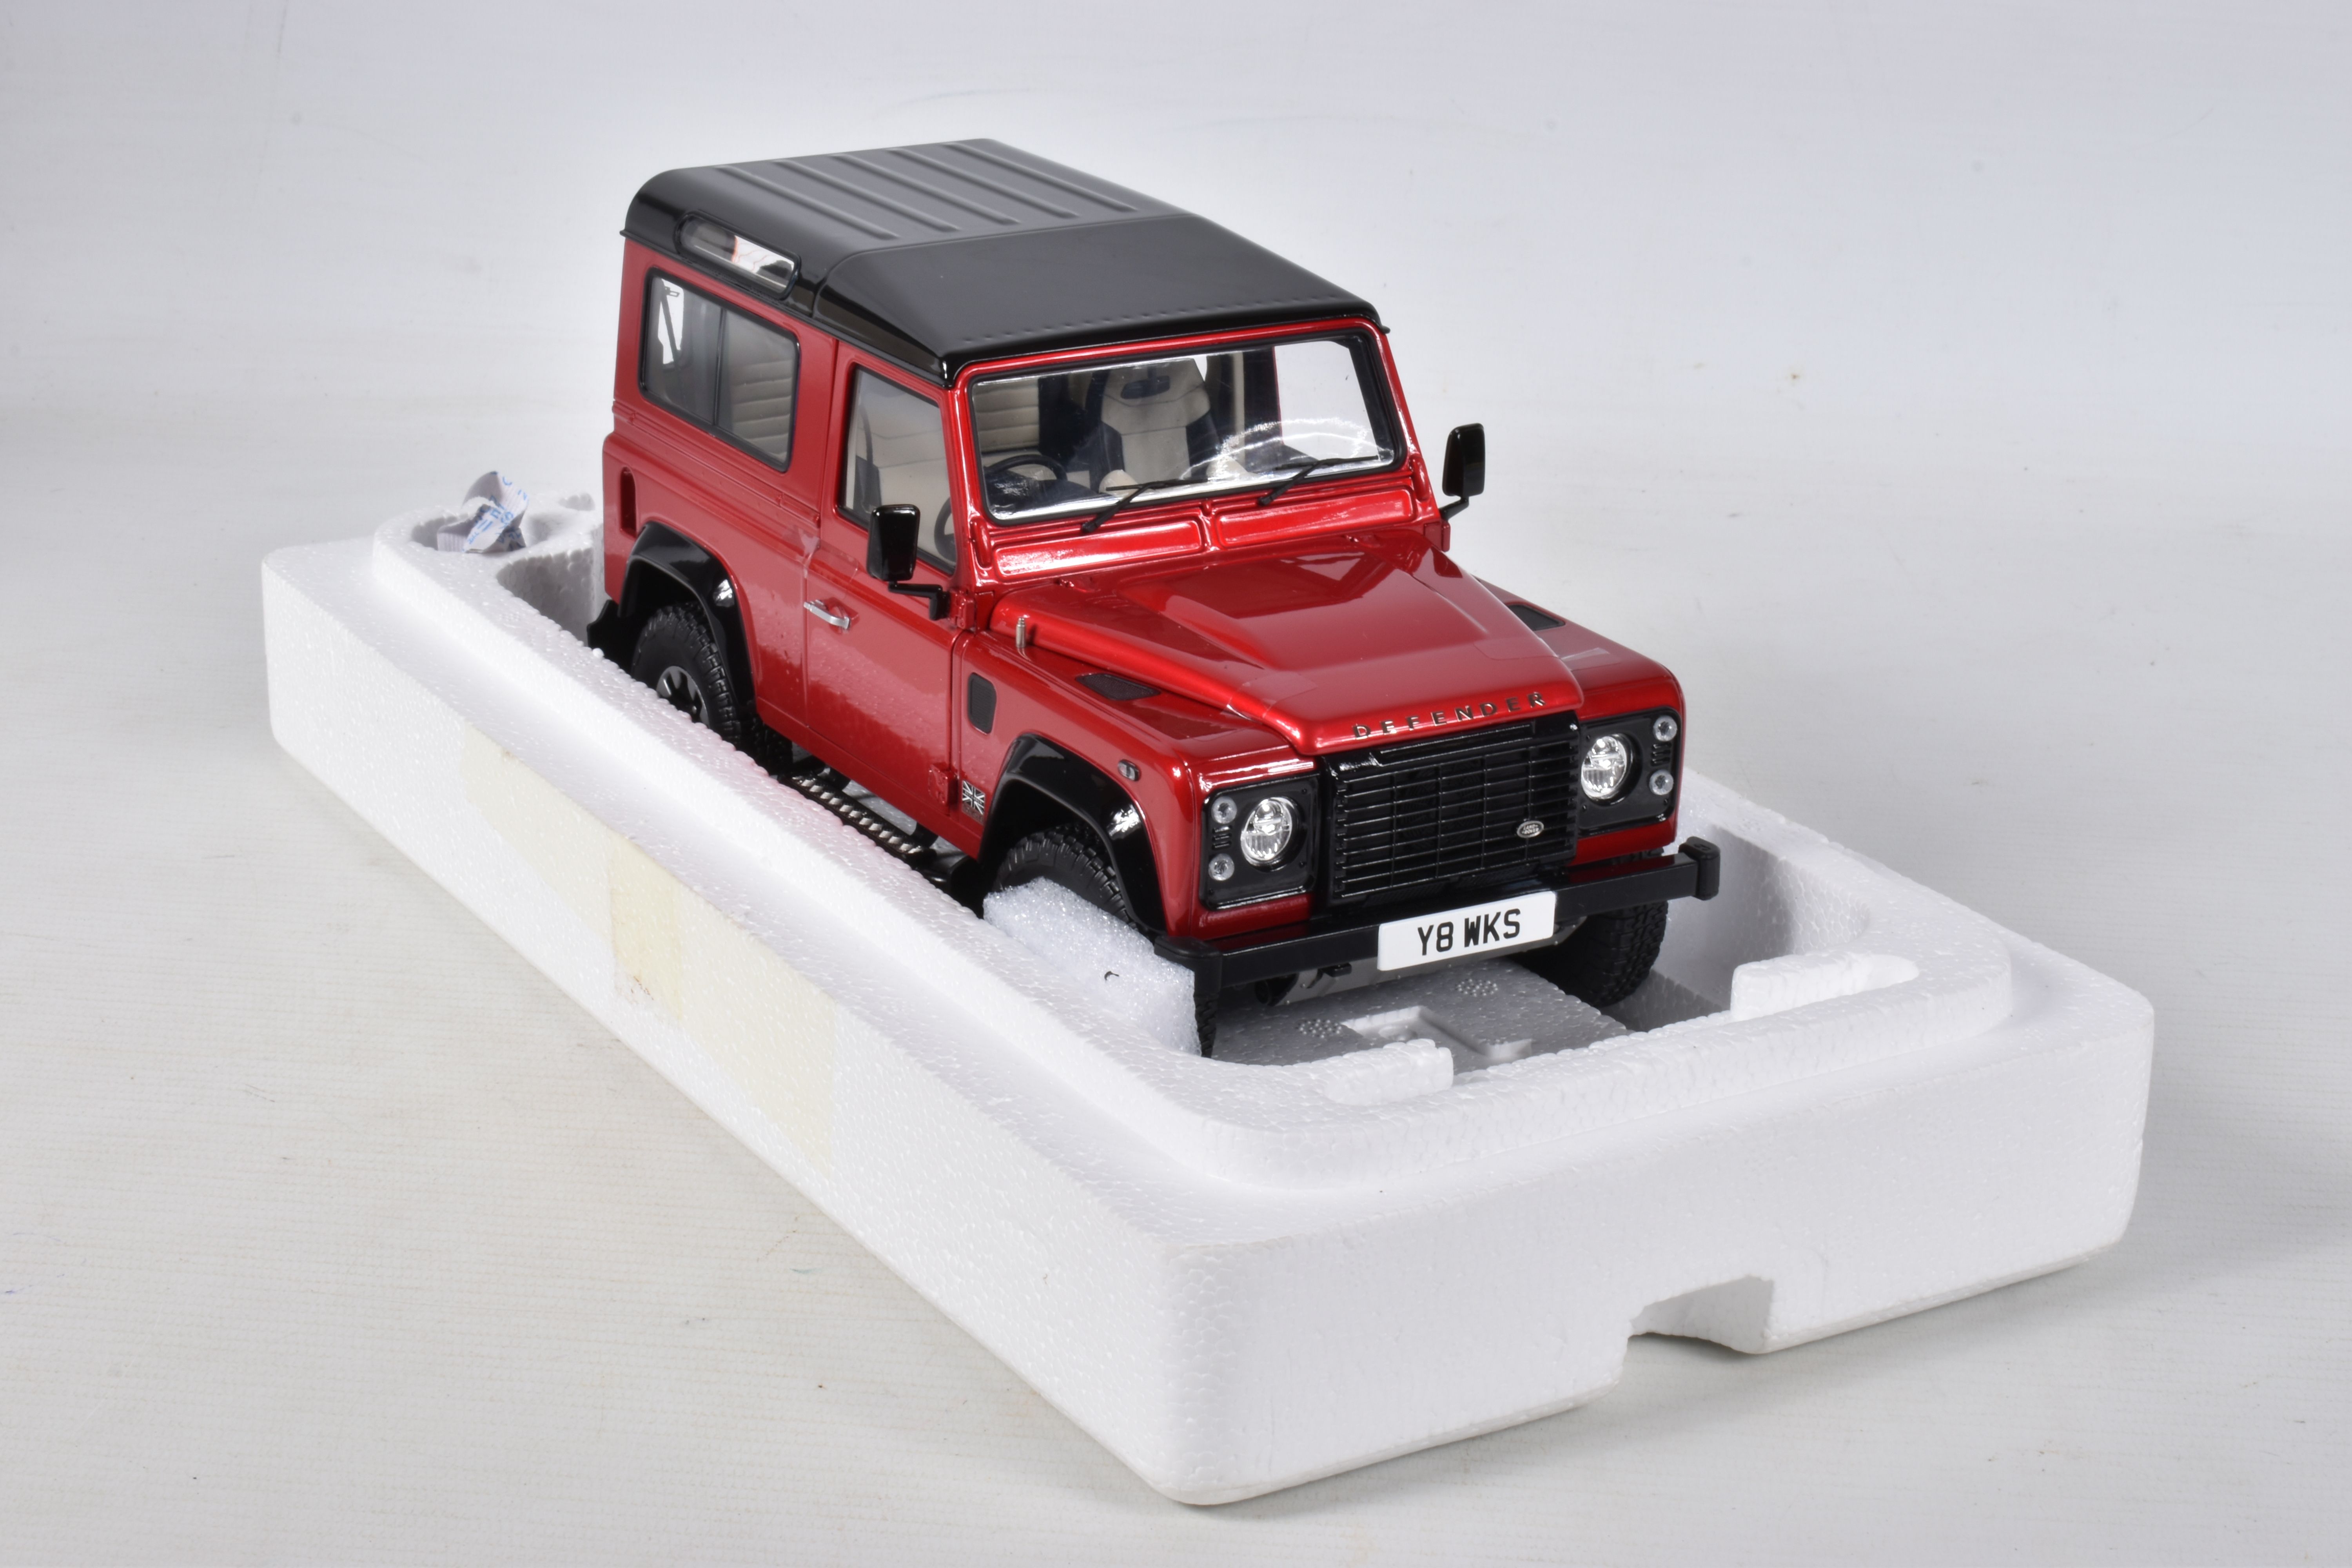 A BOXED ALMOST REAL LAND ROVER DEFENDER 90 SCALE 1:18 MODEL VEHICLE, numbered 810215, painted red - Image 4 of 9